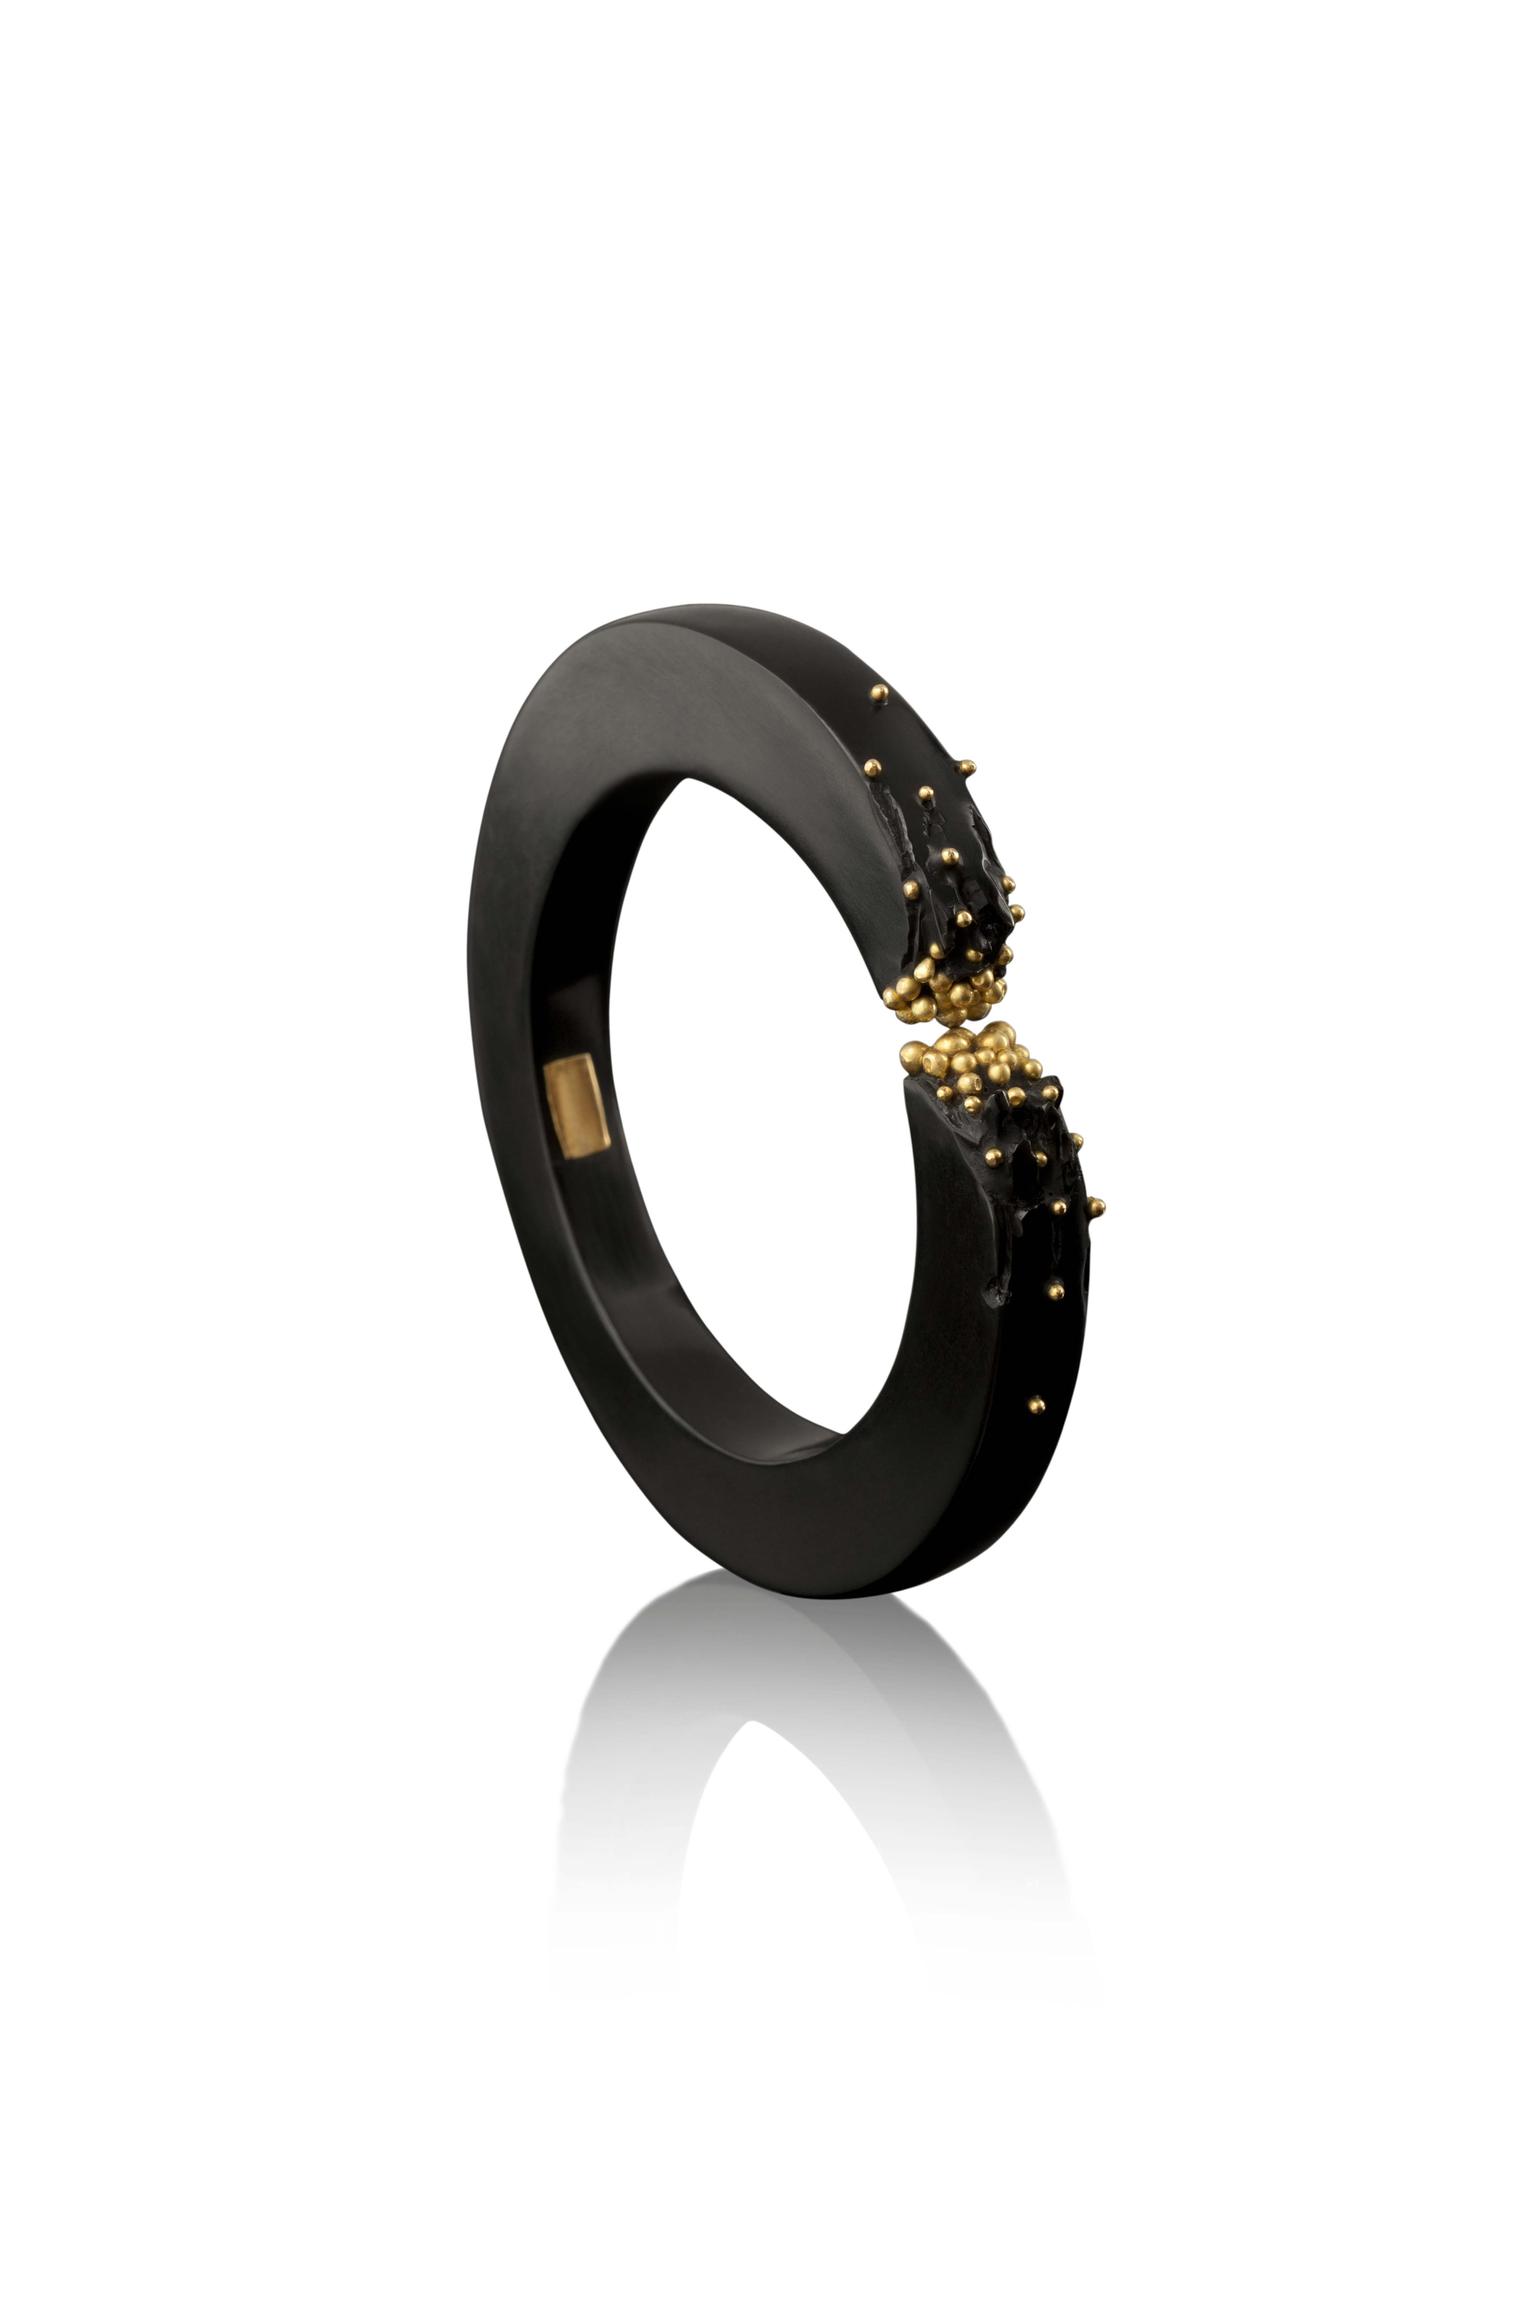 Jacqueline Cullen carved Whitby jet bangle with gold granulation.